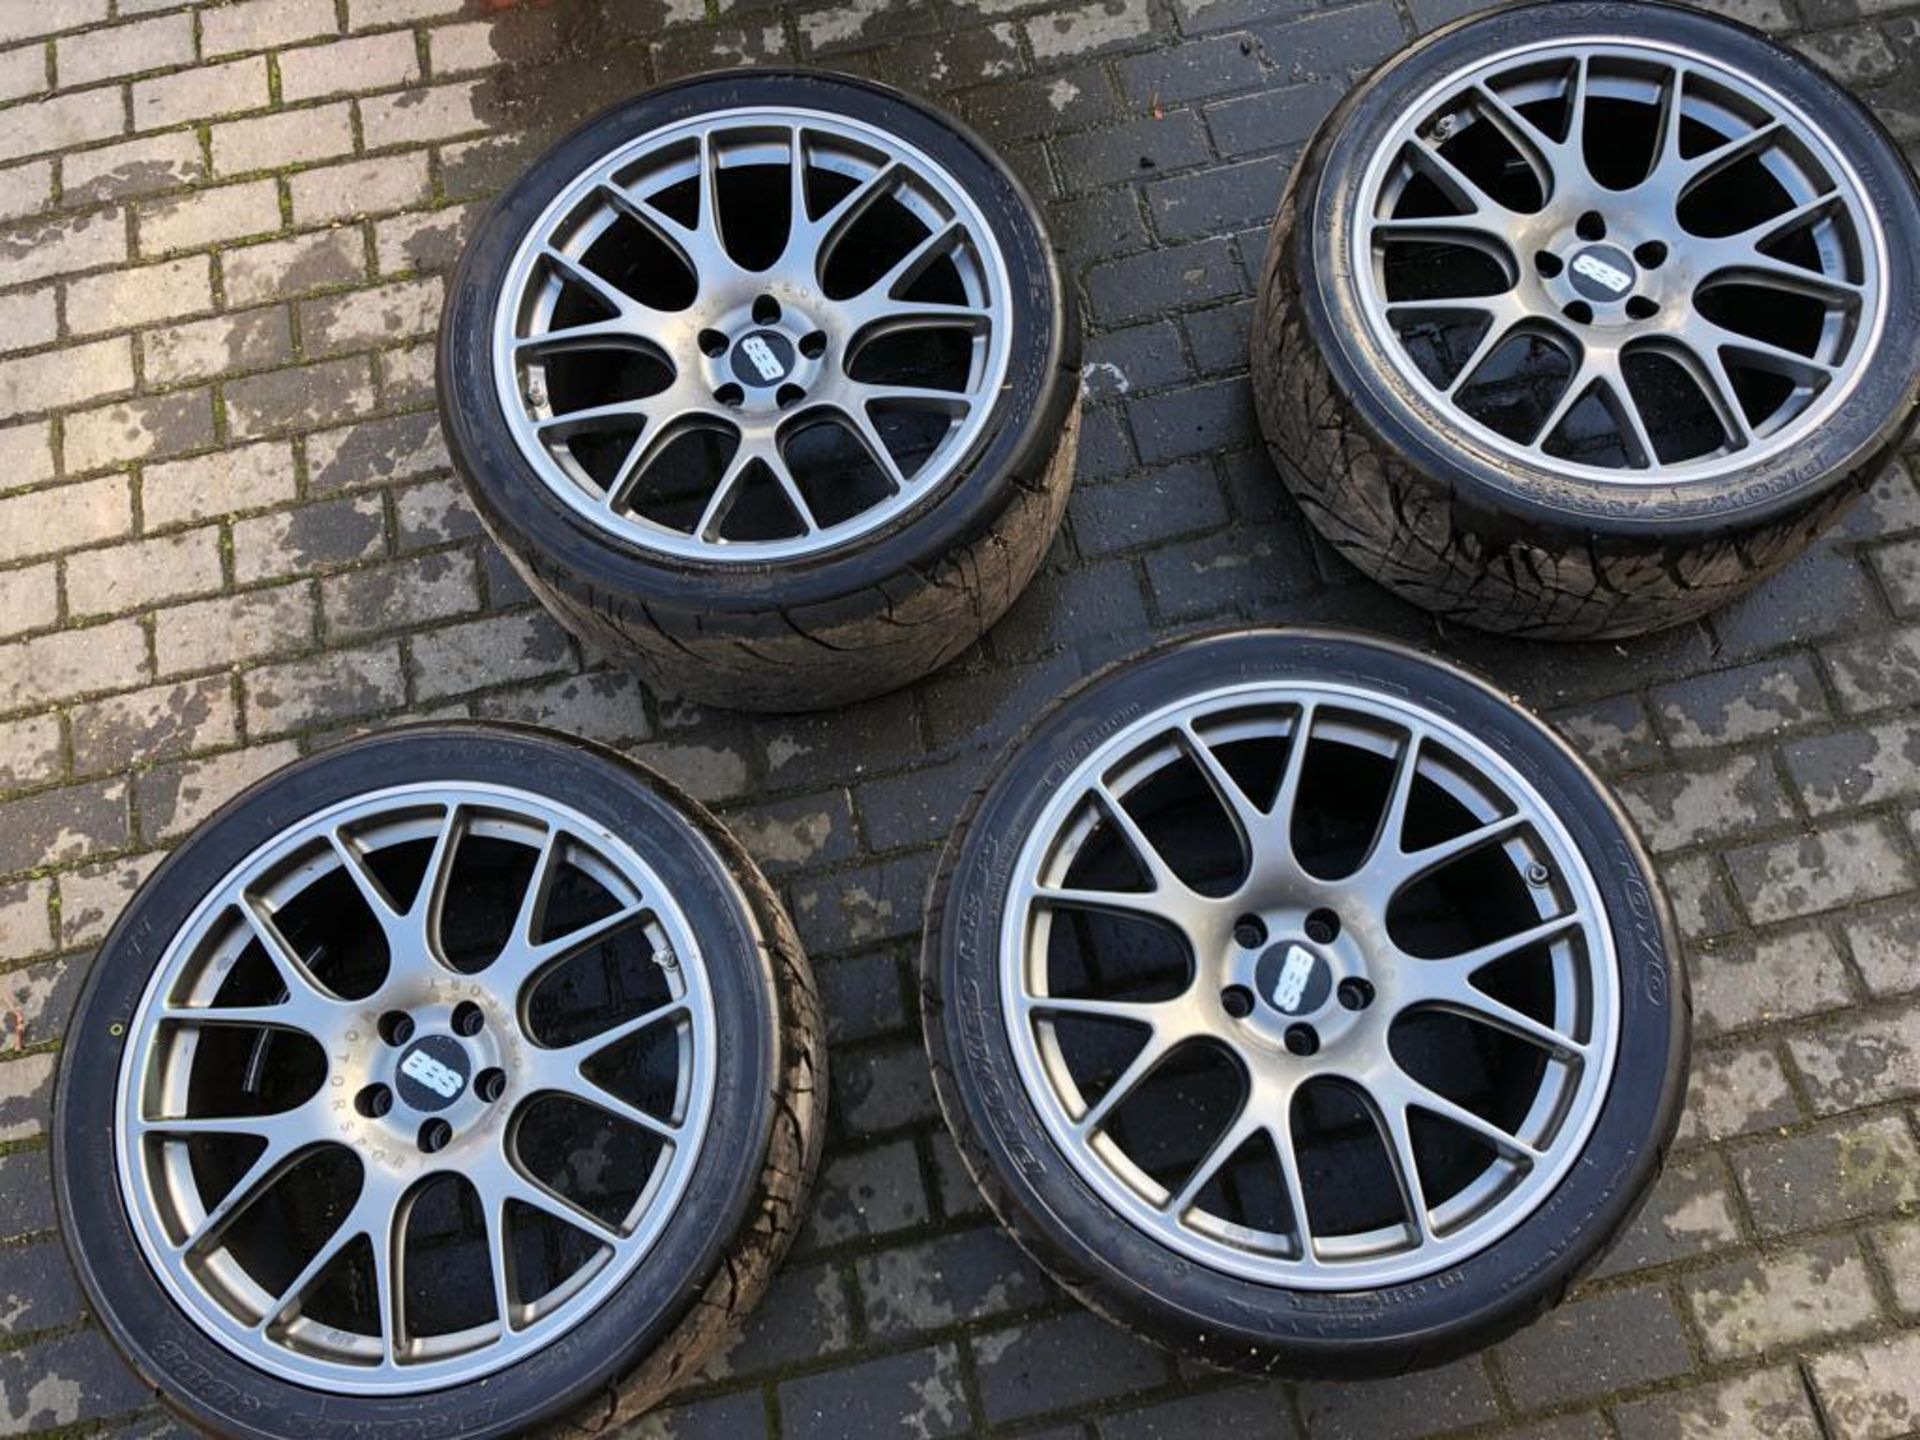 GENUINE BBS CH-R 20" SATIN ANTHRACITE NÜRBURGRING ALLOY WHEELS SET OF 4, TOYO R888 TYRES £3400 NEW